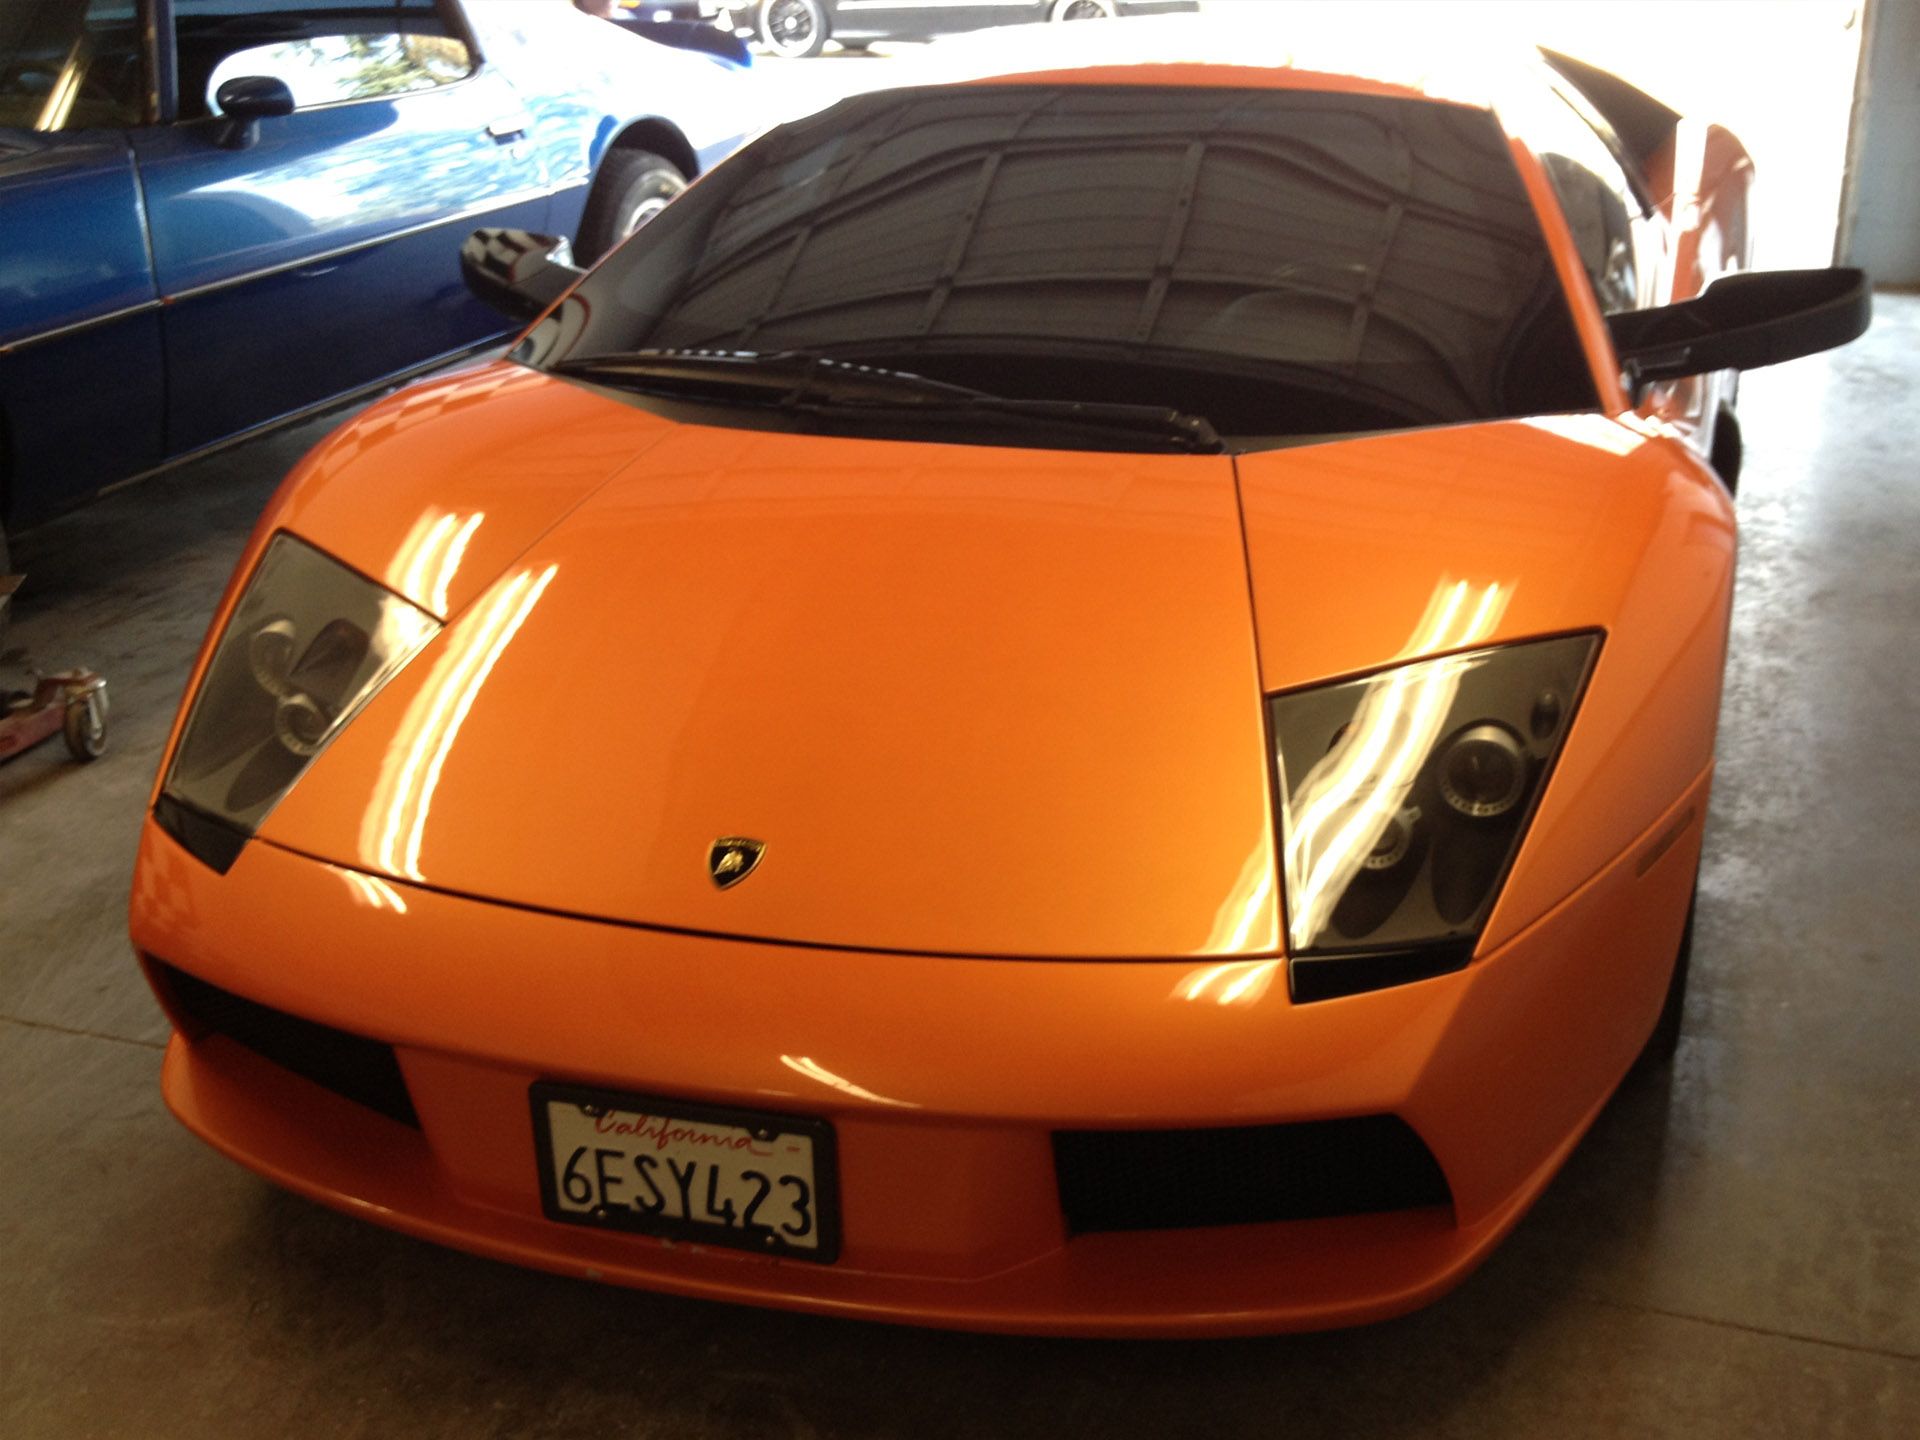 After shot, front view of orange Lambourghini